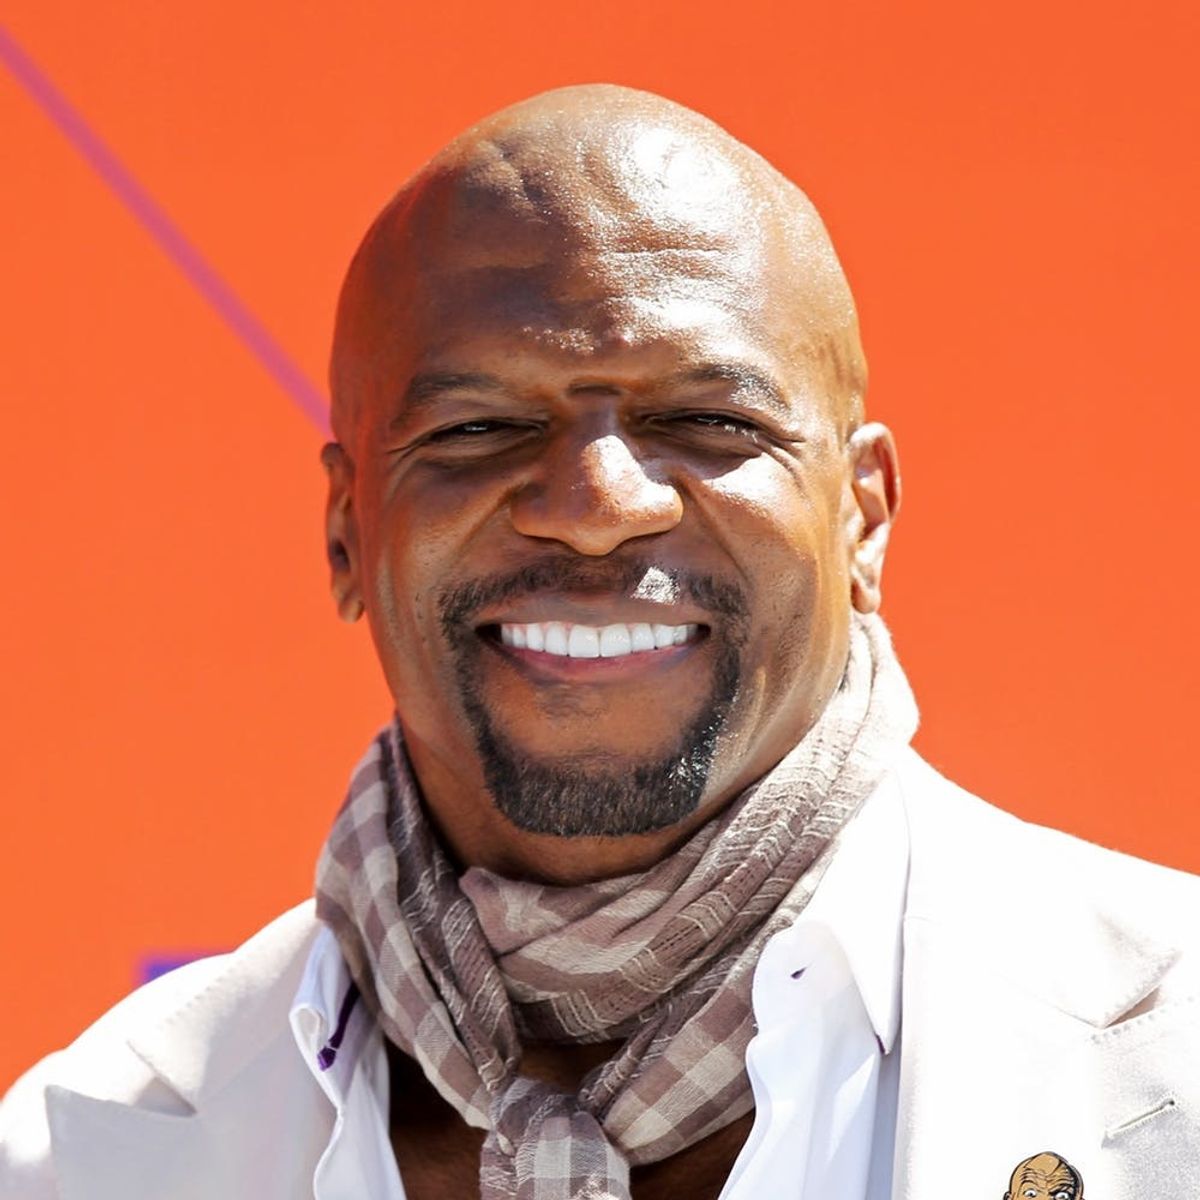 Terry Crews Spoke Against the ‘Cult of Toxic Masculinity’ in a Senate Testimony About Sexual Assault